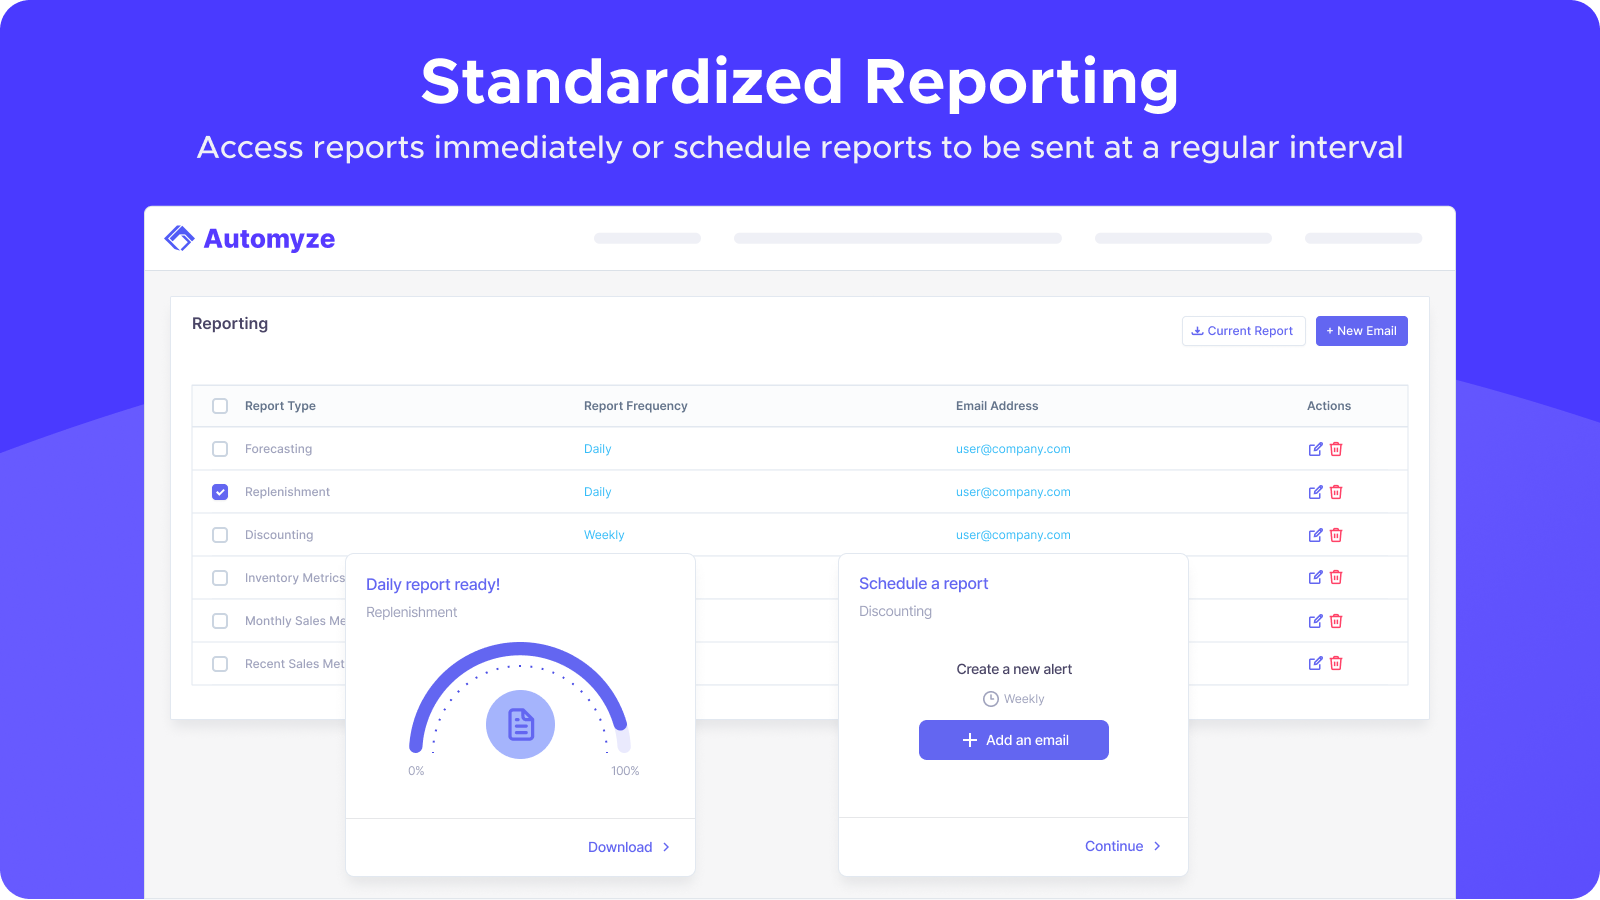 Schedule pre-built reports to be emailed or download immediately